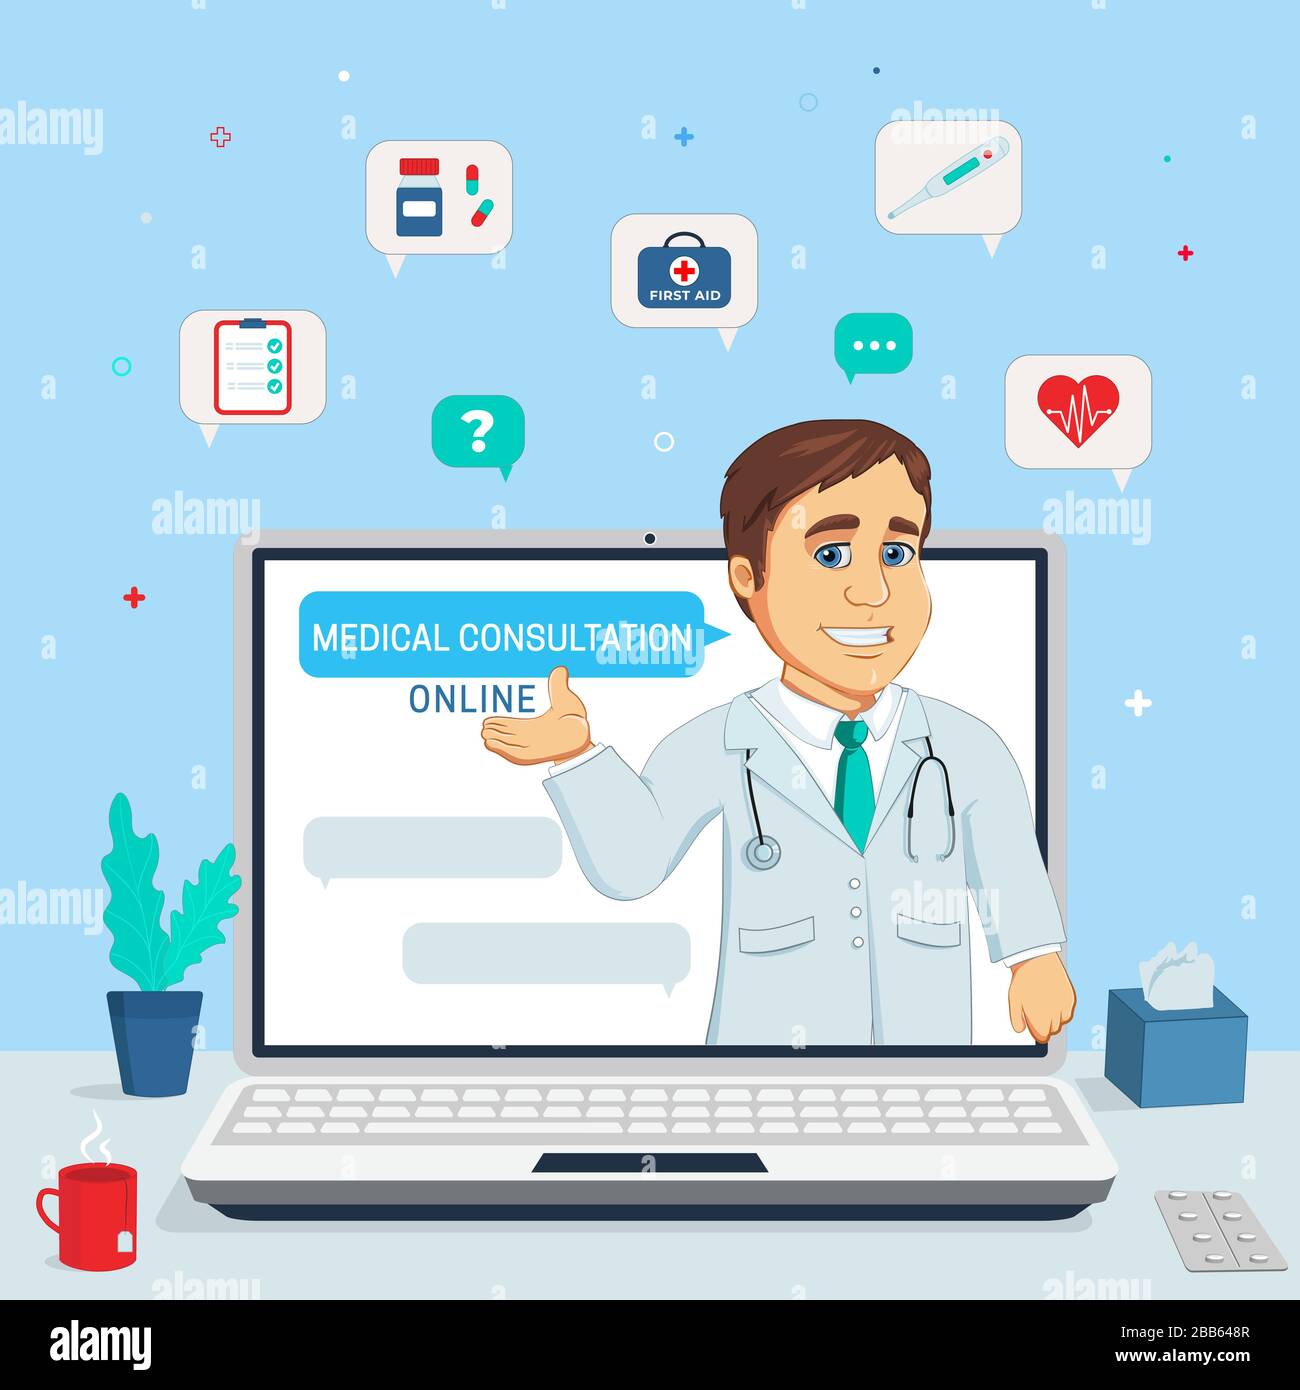 Online medical consultation and support. Online doctor. Vector illustration. Stock Vector